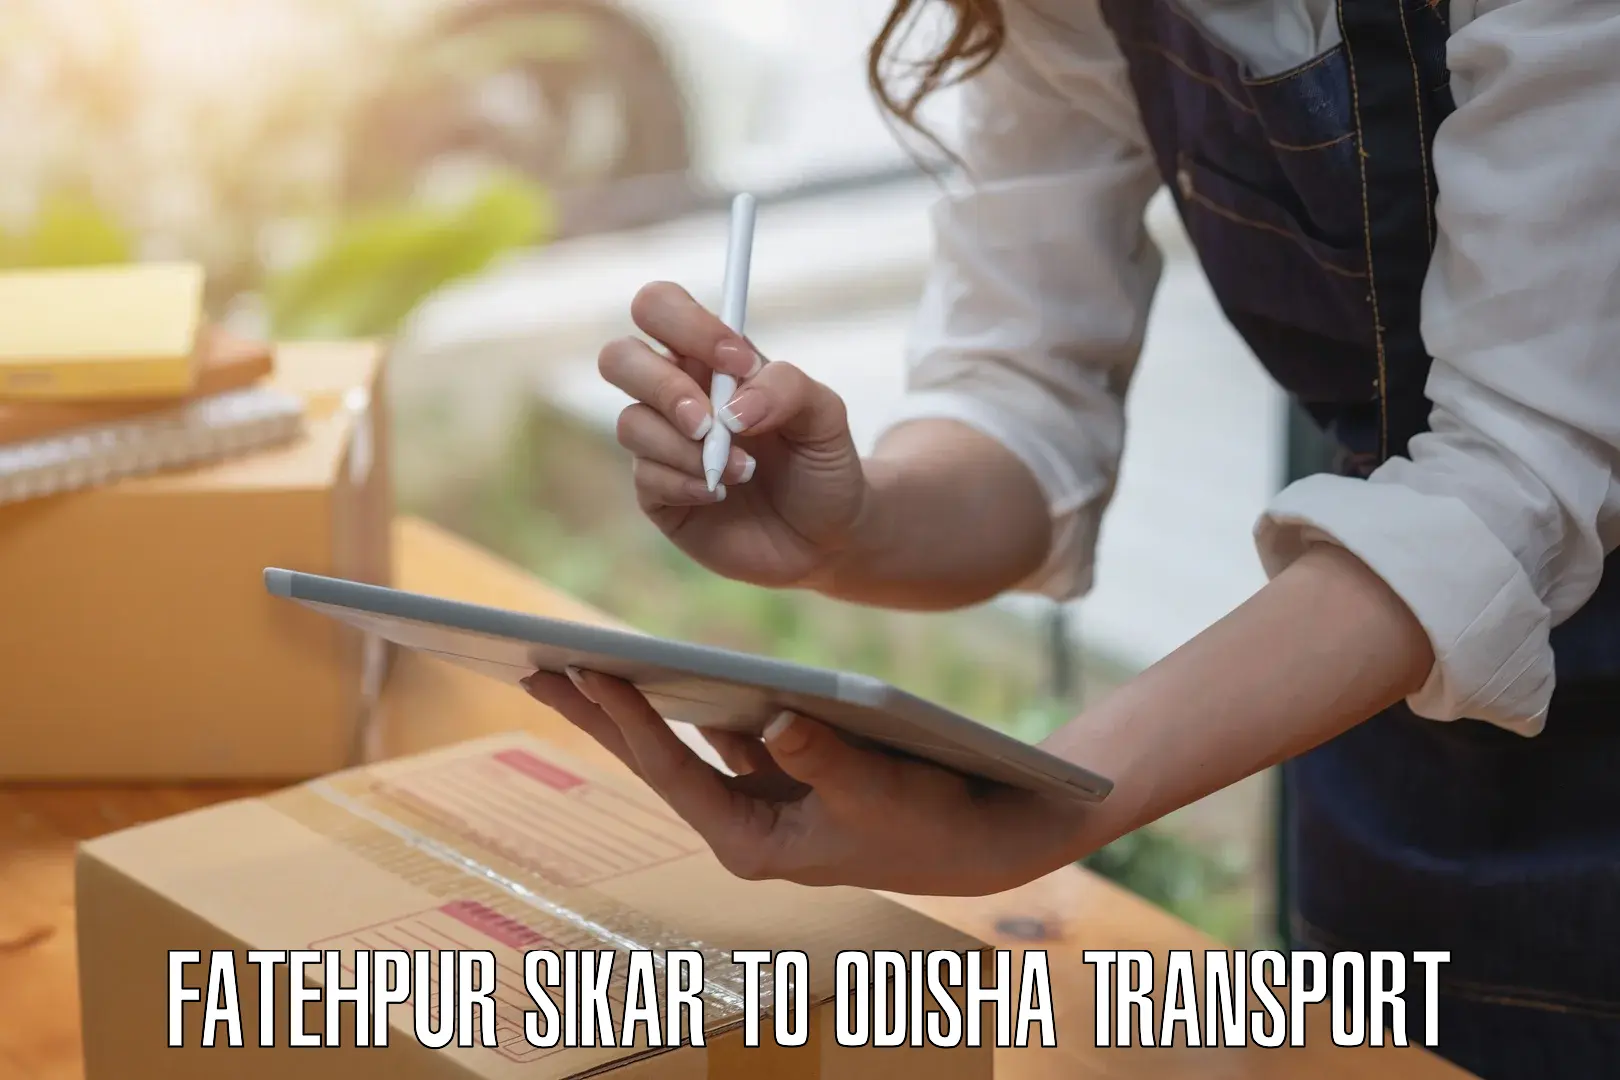 Transport bike from one state to another Fatehpur Sikar to Sonepur Subarnapur